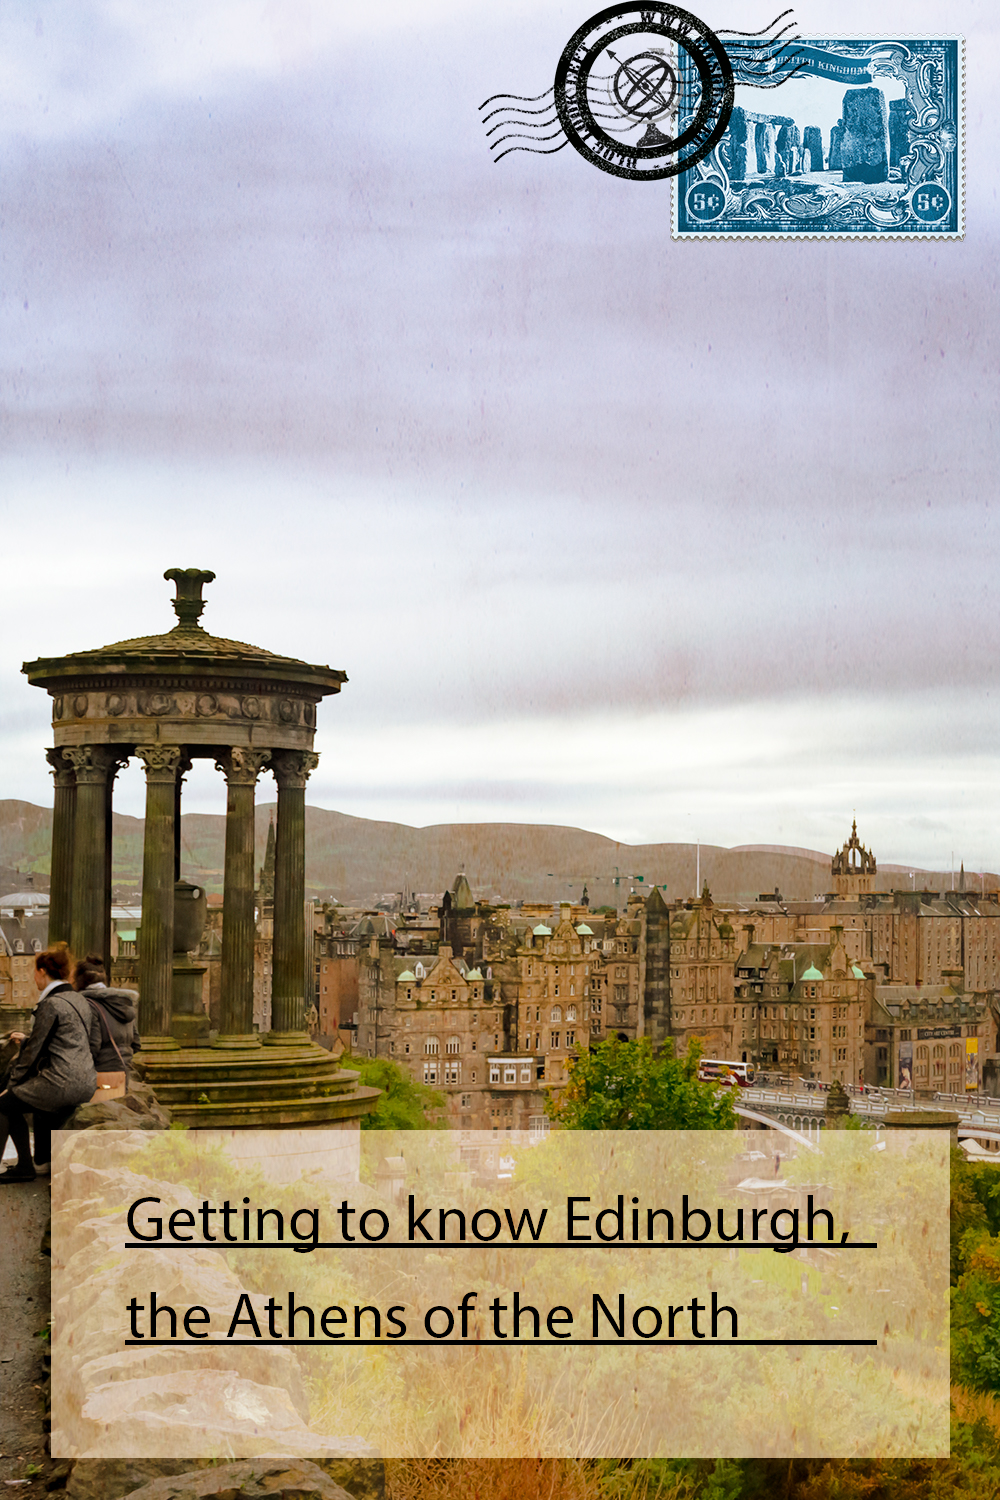 Getting to know Edinburgh, the Athens of the North